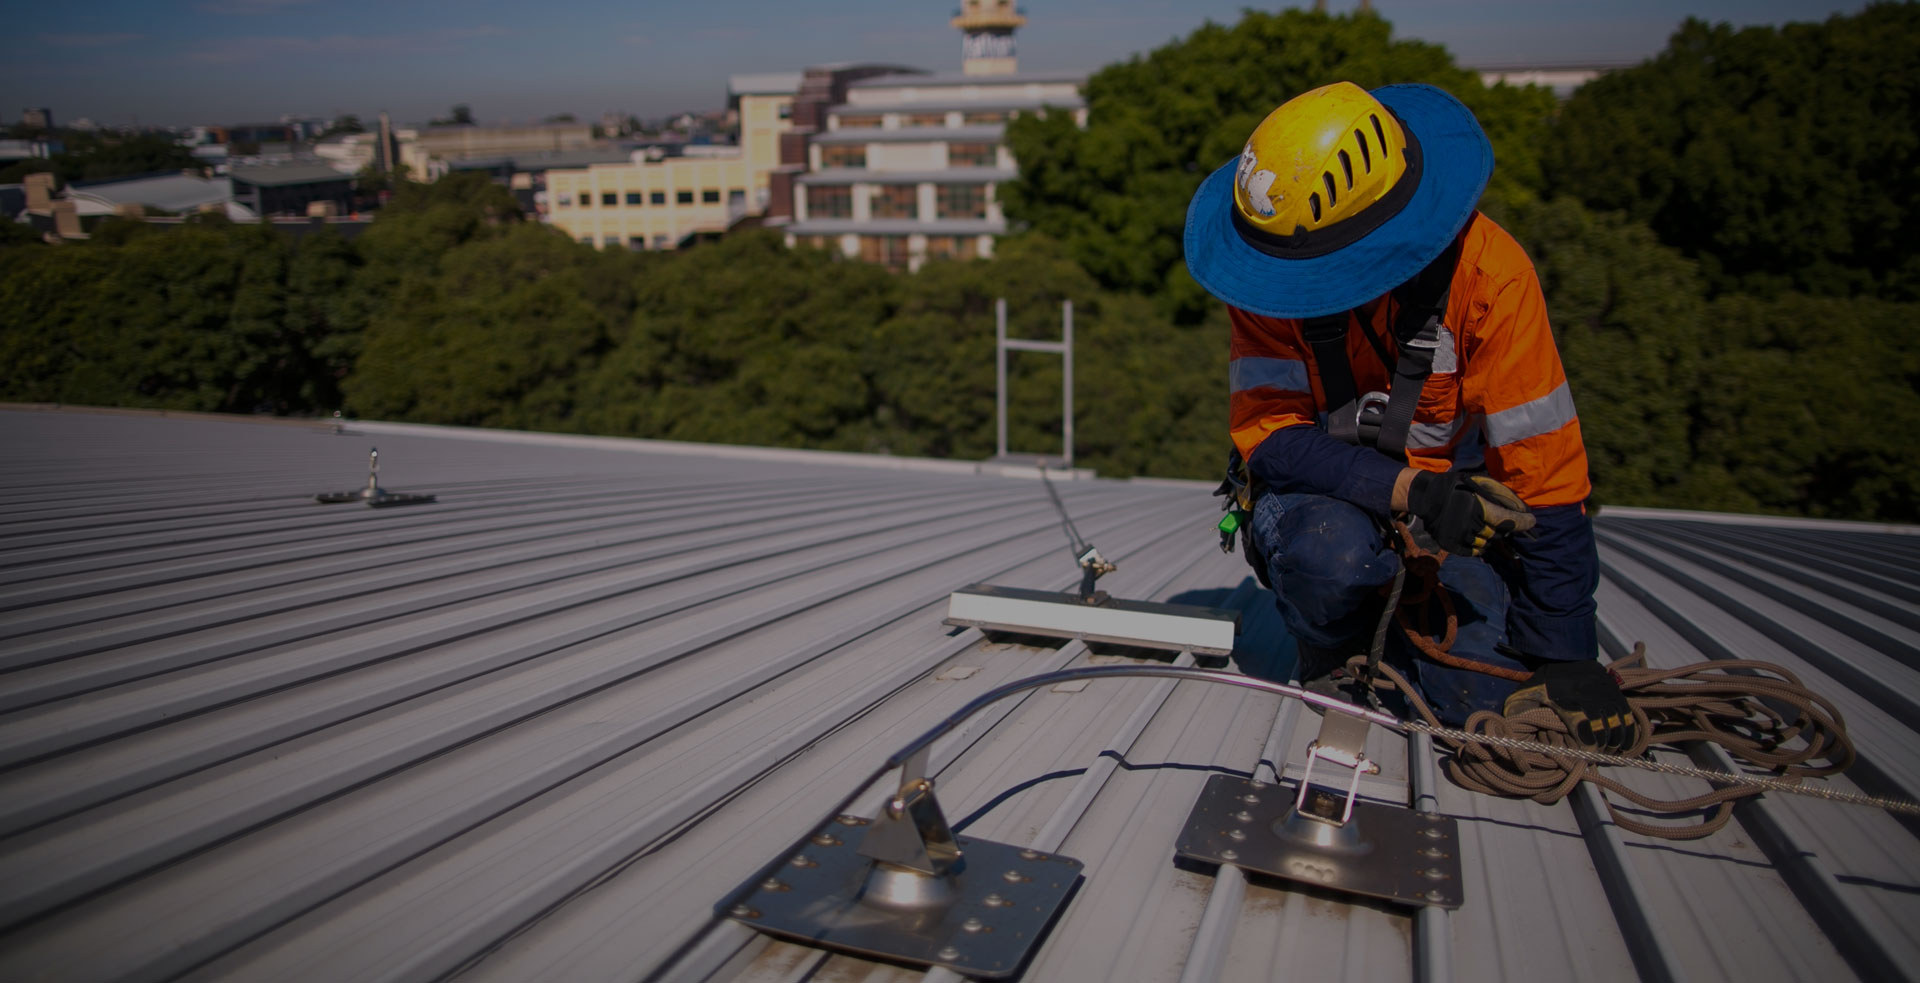 Roof Anchor Point Testing & Rigging and Rope Access- Accessableqld